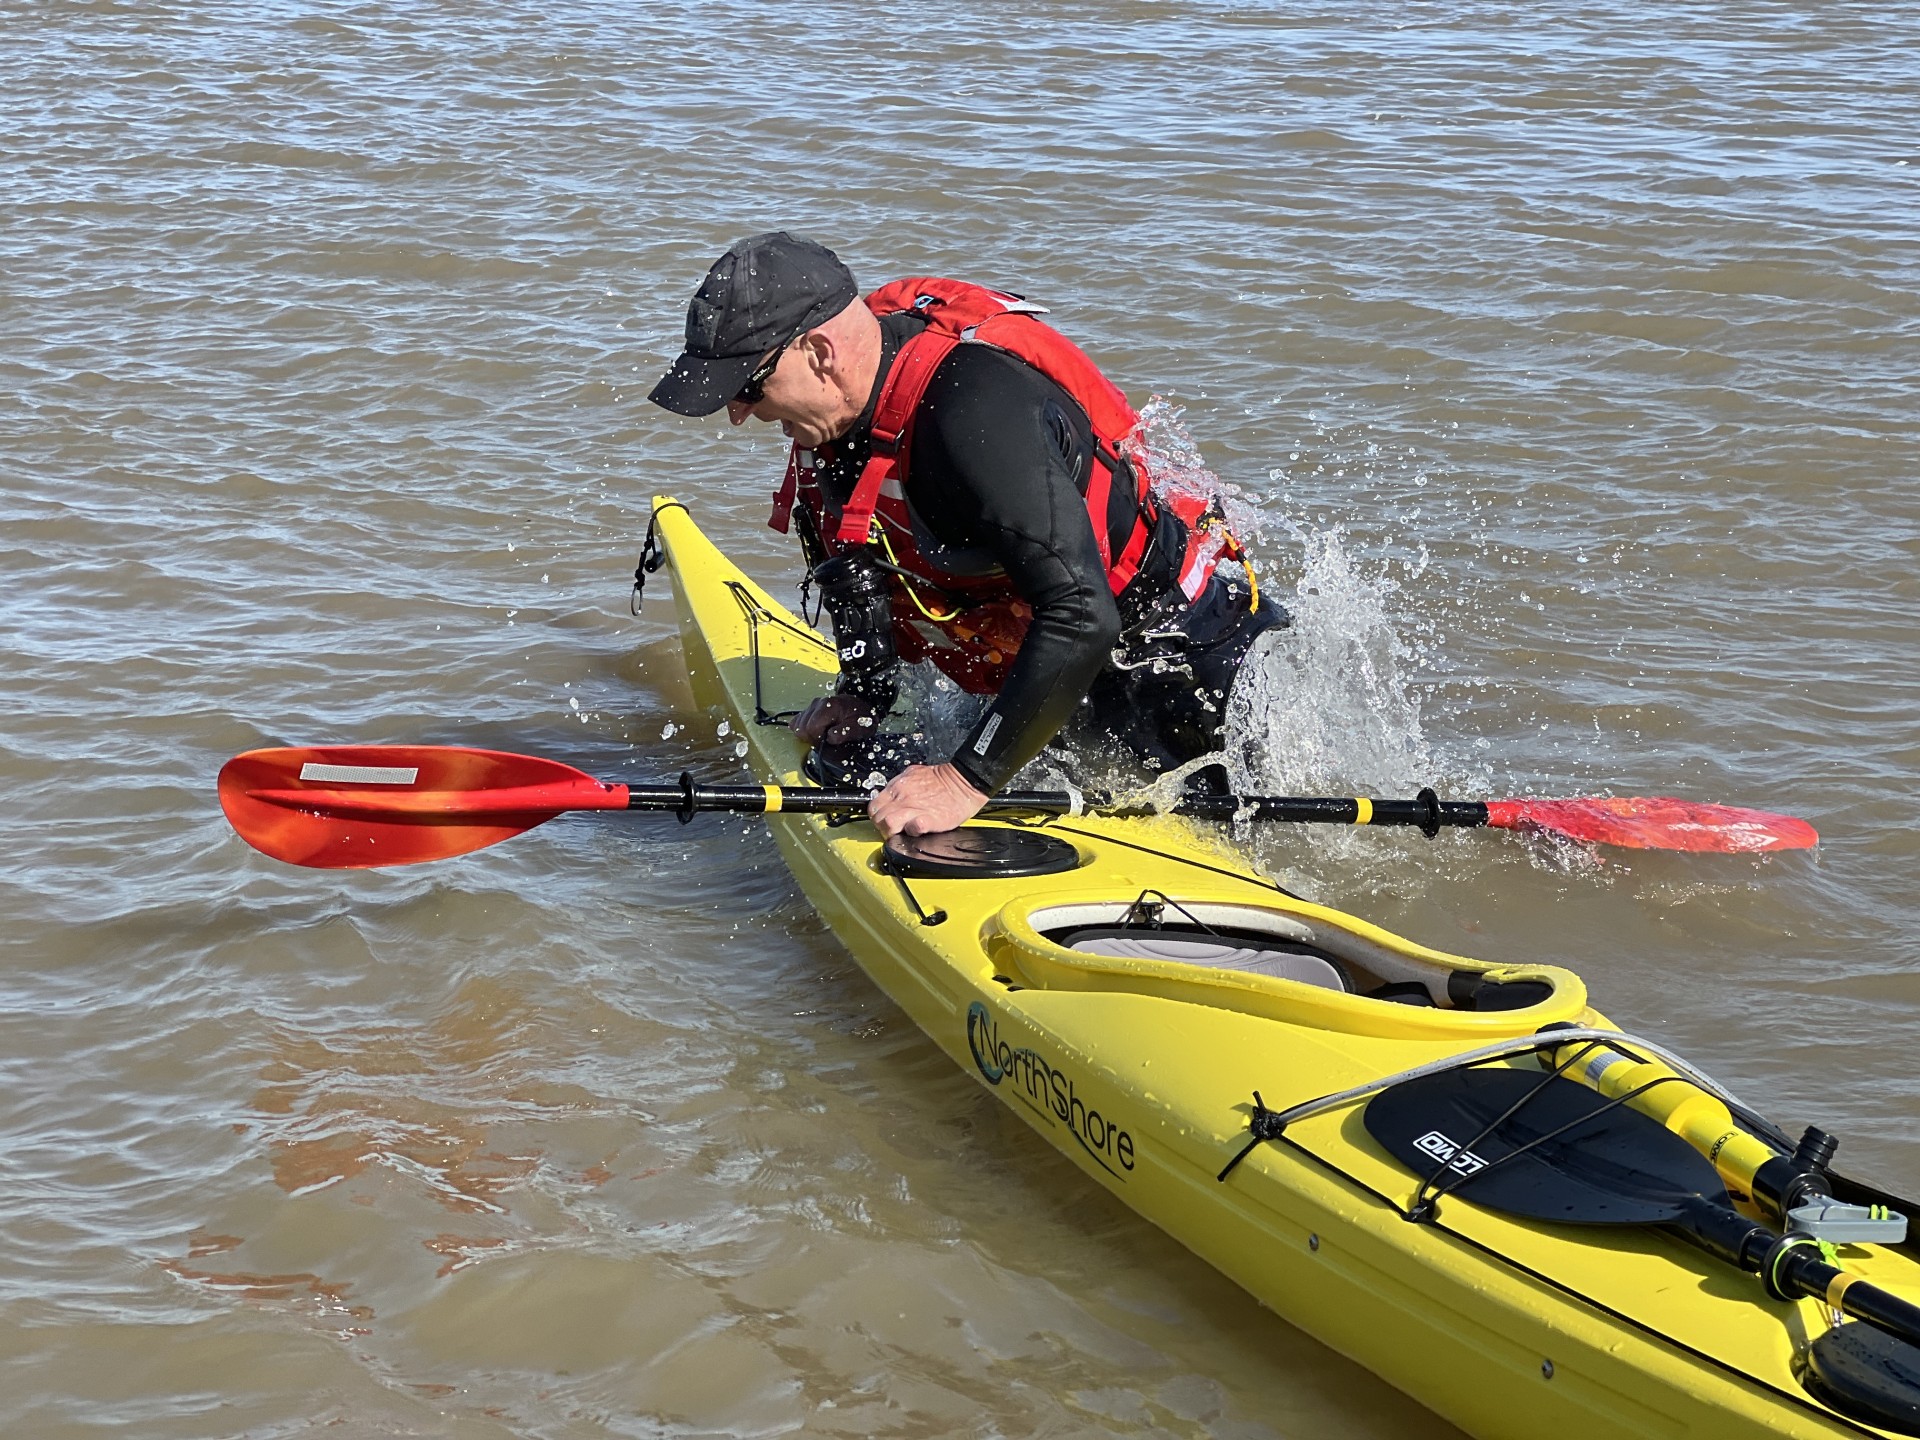 Hauling out to self rescue recover with NOMAD Sea Kayaking.